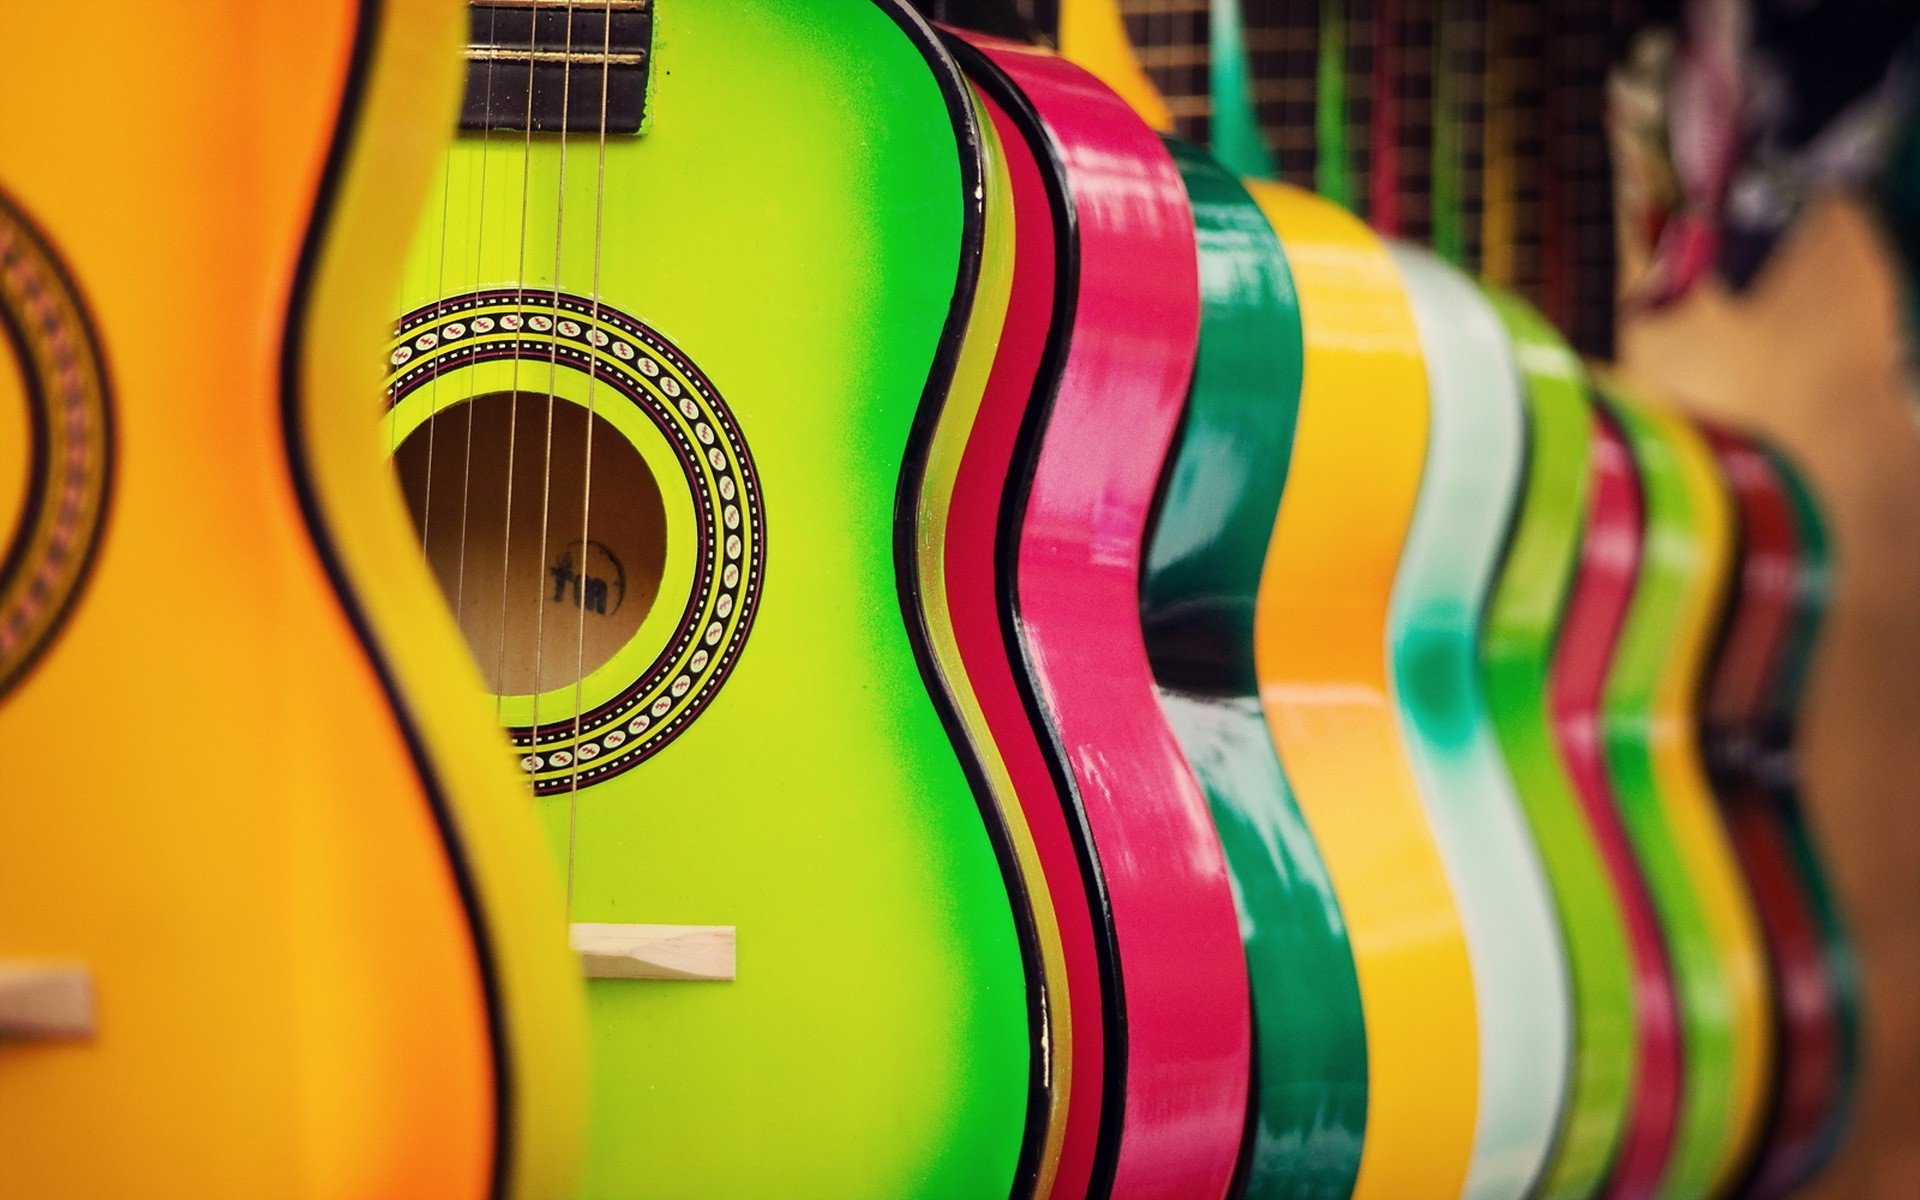 Download wallpapers Multicolored guitars, guitar shop, music, wooden guitars  for desktop with resolution 1920x1200. High Quality HD pictures wallpapers